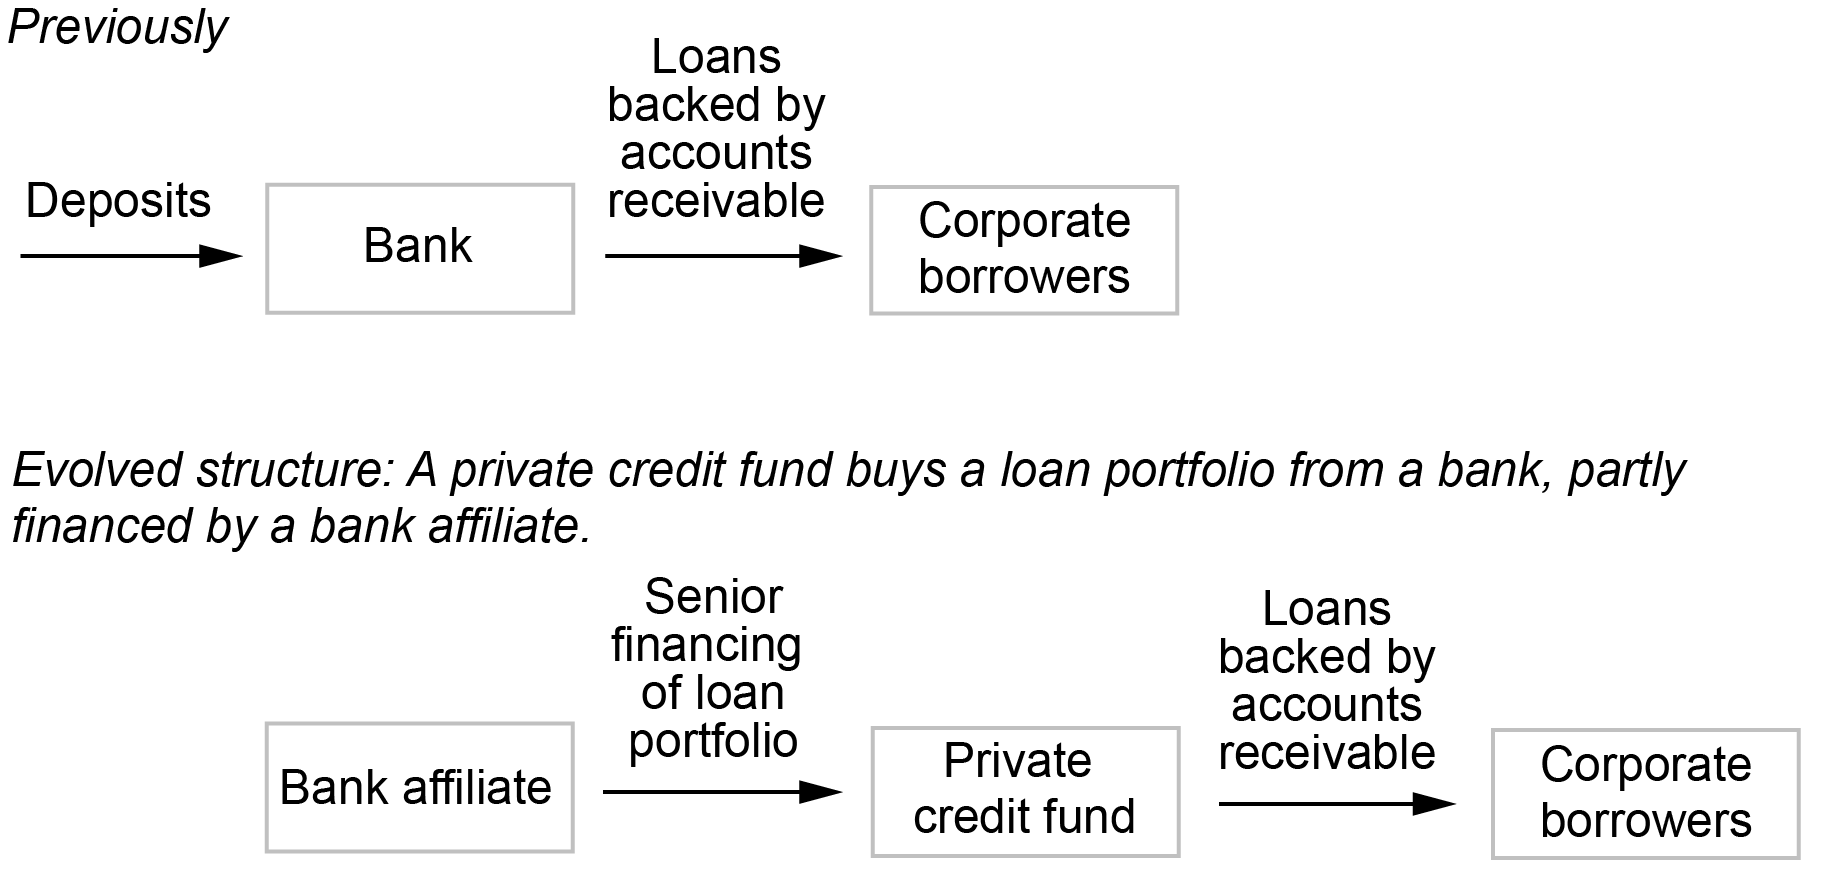 Alt=”further exploration of the scenario in the first chart, where the results of banks’ distress driven by NBFIs may reduce banks’ support to the same NBFIs through tighter lending (round 3); for example, reducing credit lines to real estate investment trusts (REITs) and reducing term loans to collateralized loan obligations (CLOs) (round 4), in turn potentially causing REITs to reduce investment in real estate and CLOs to reduce investments in leveraged loans” 